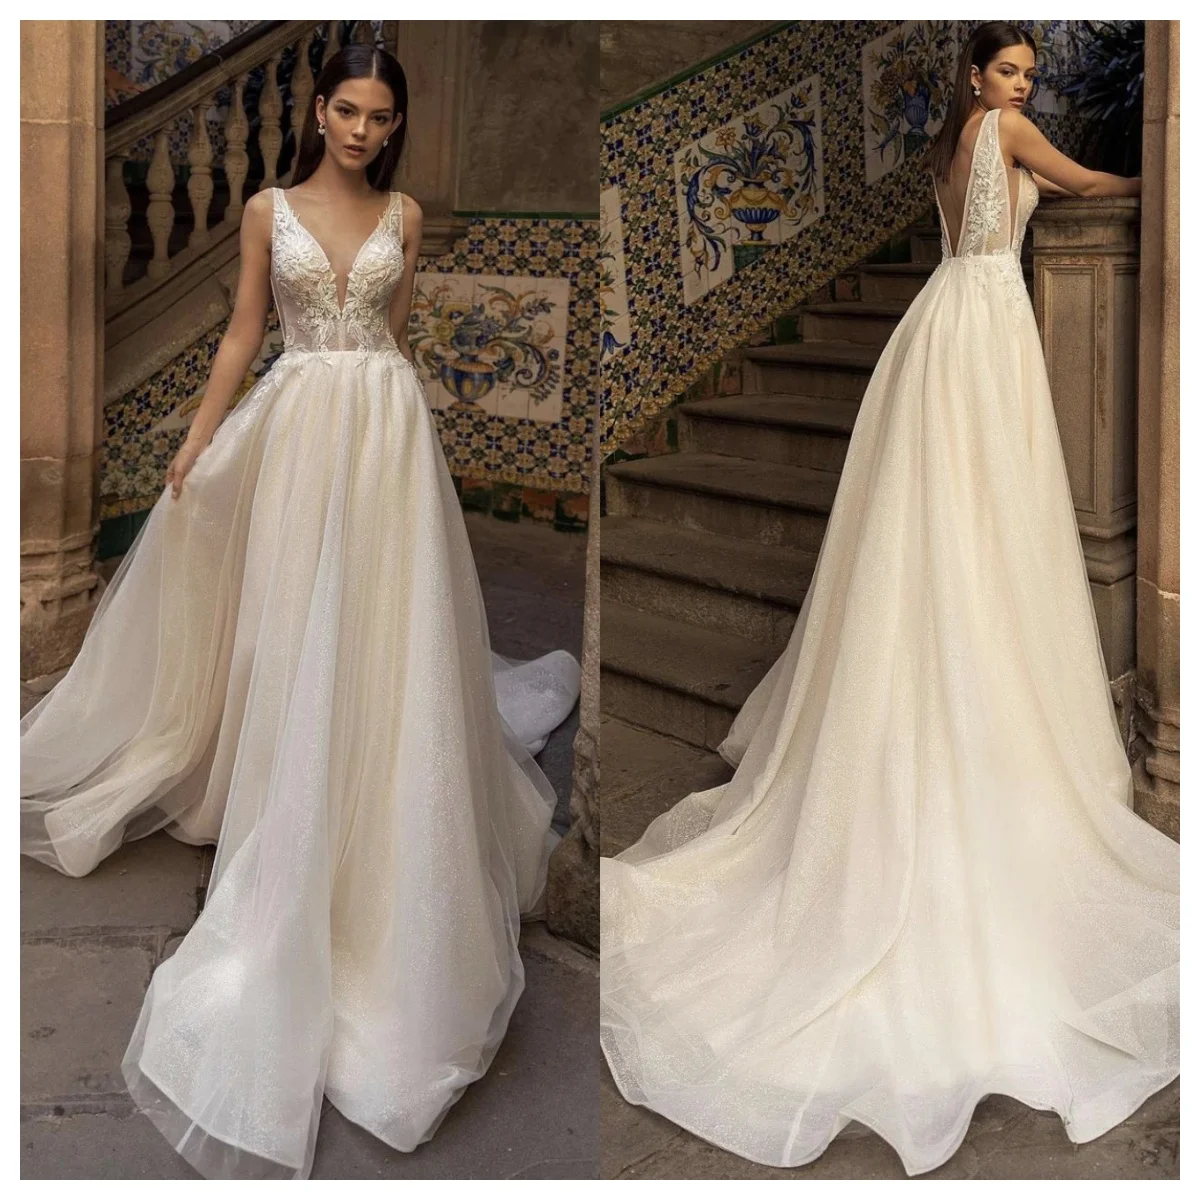 

Romantic A Line Weeding Dress Deep V Neck Glitter Tulle Lace Applique Sleeveless V Cut Sweep Train Bridal Gowns